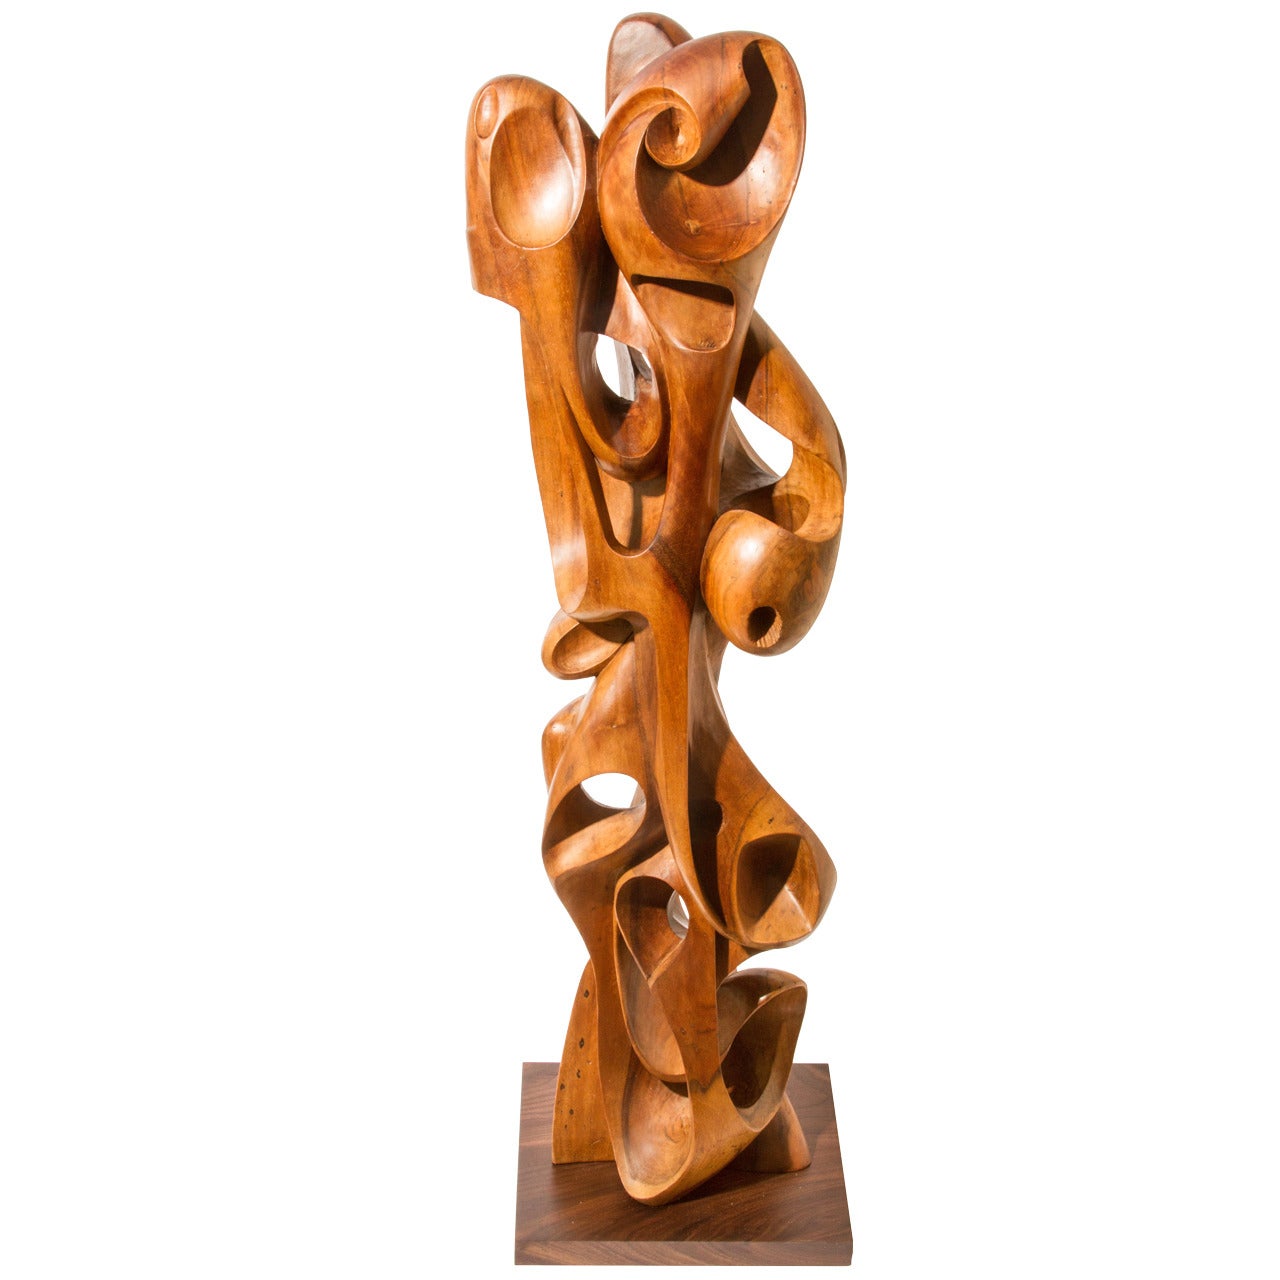 Tall Biomorphic Carved Wood Sculpture